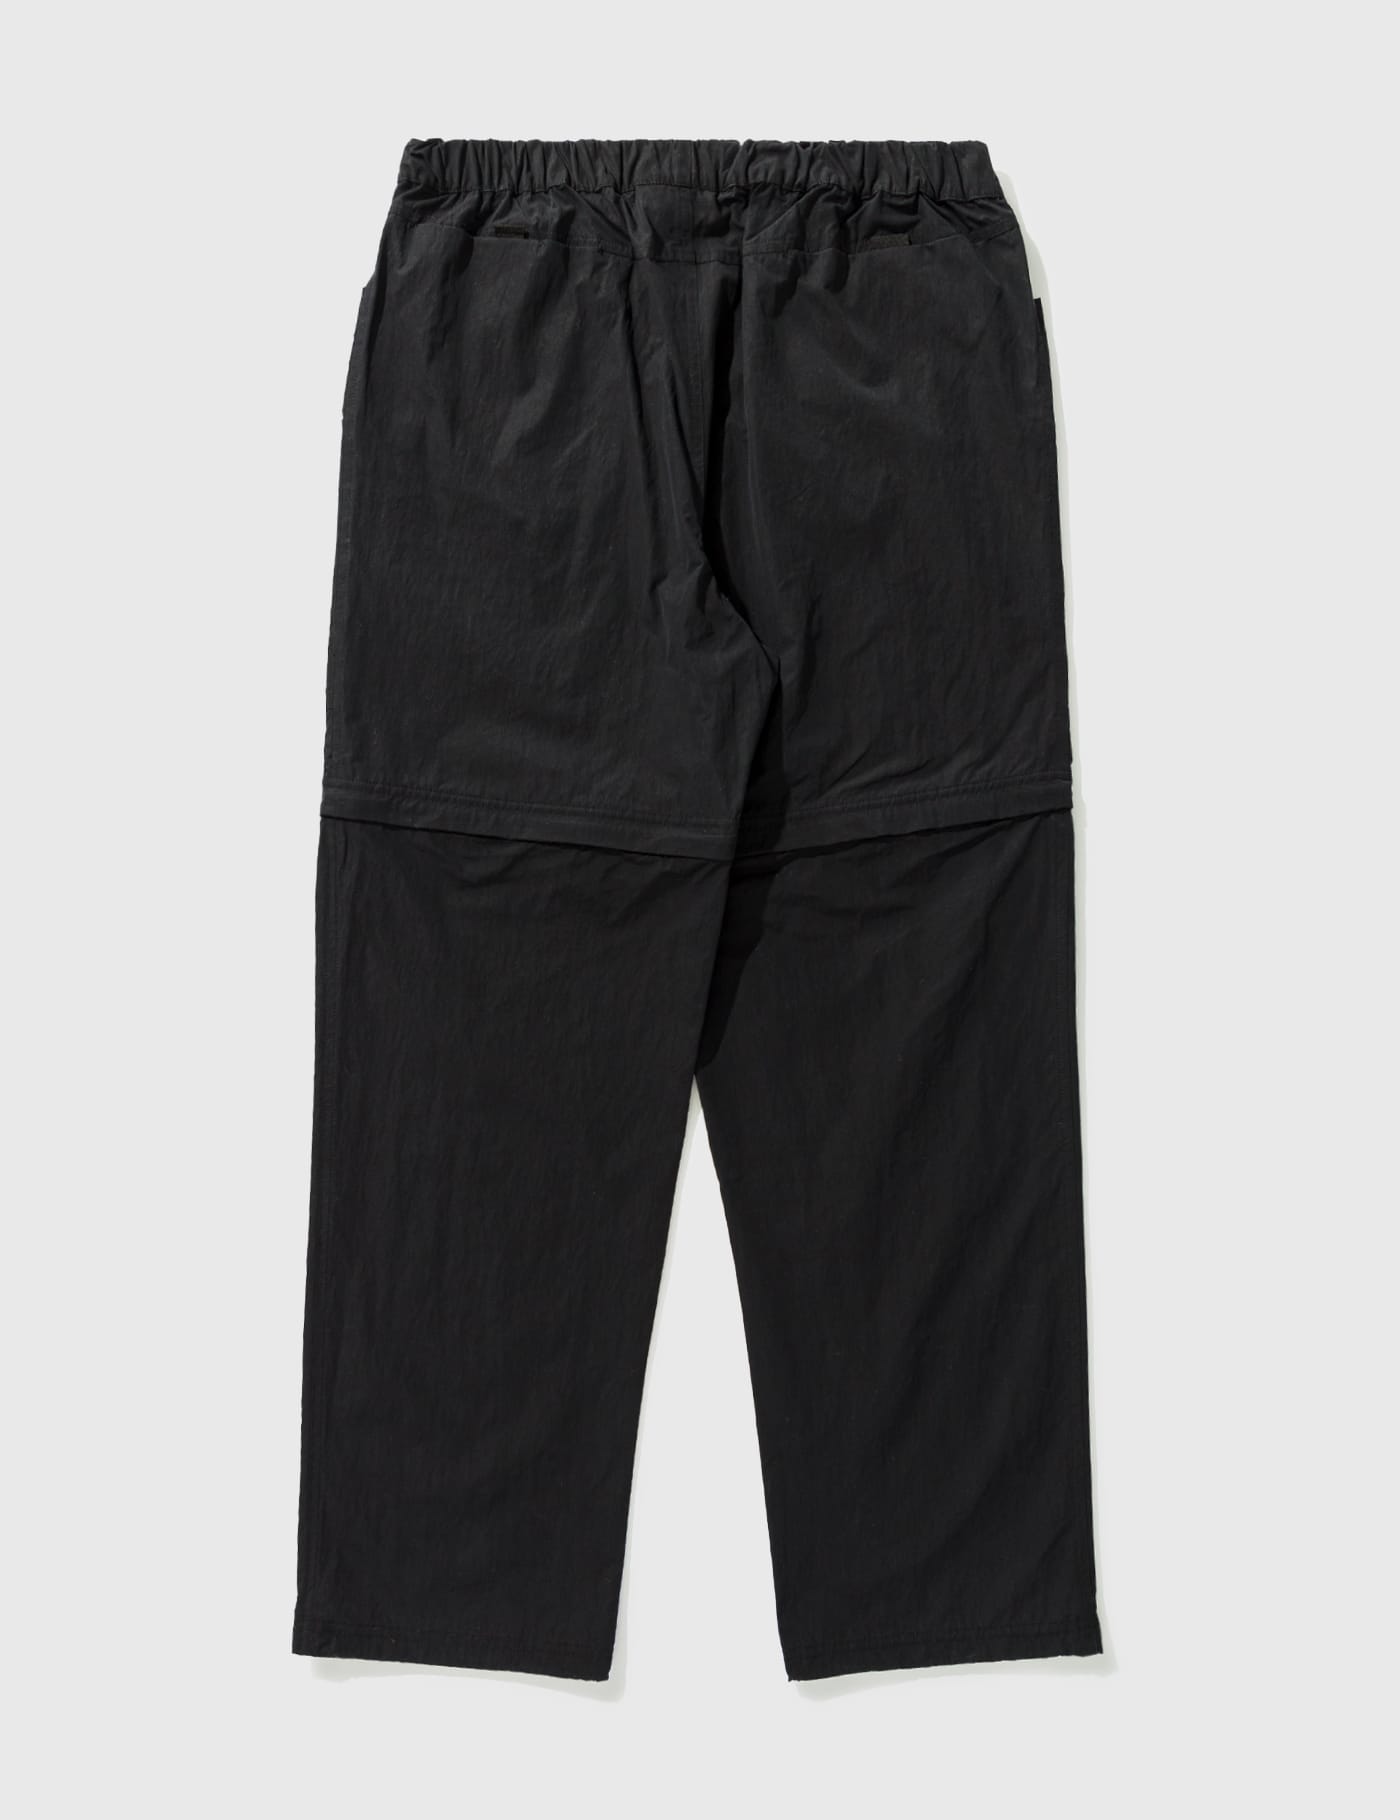 Stüssy - Nyco Convertible Pants | HBX - Globally Curated Fashion